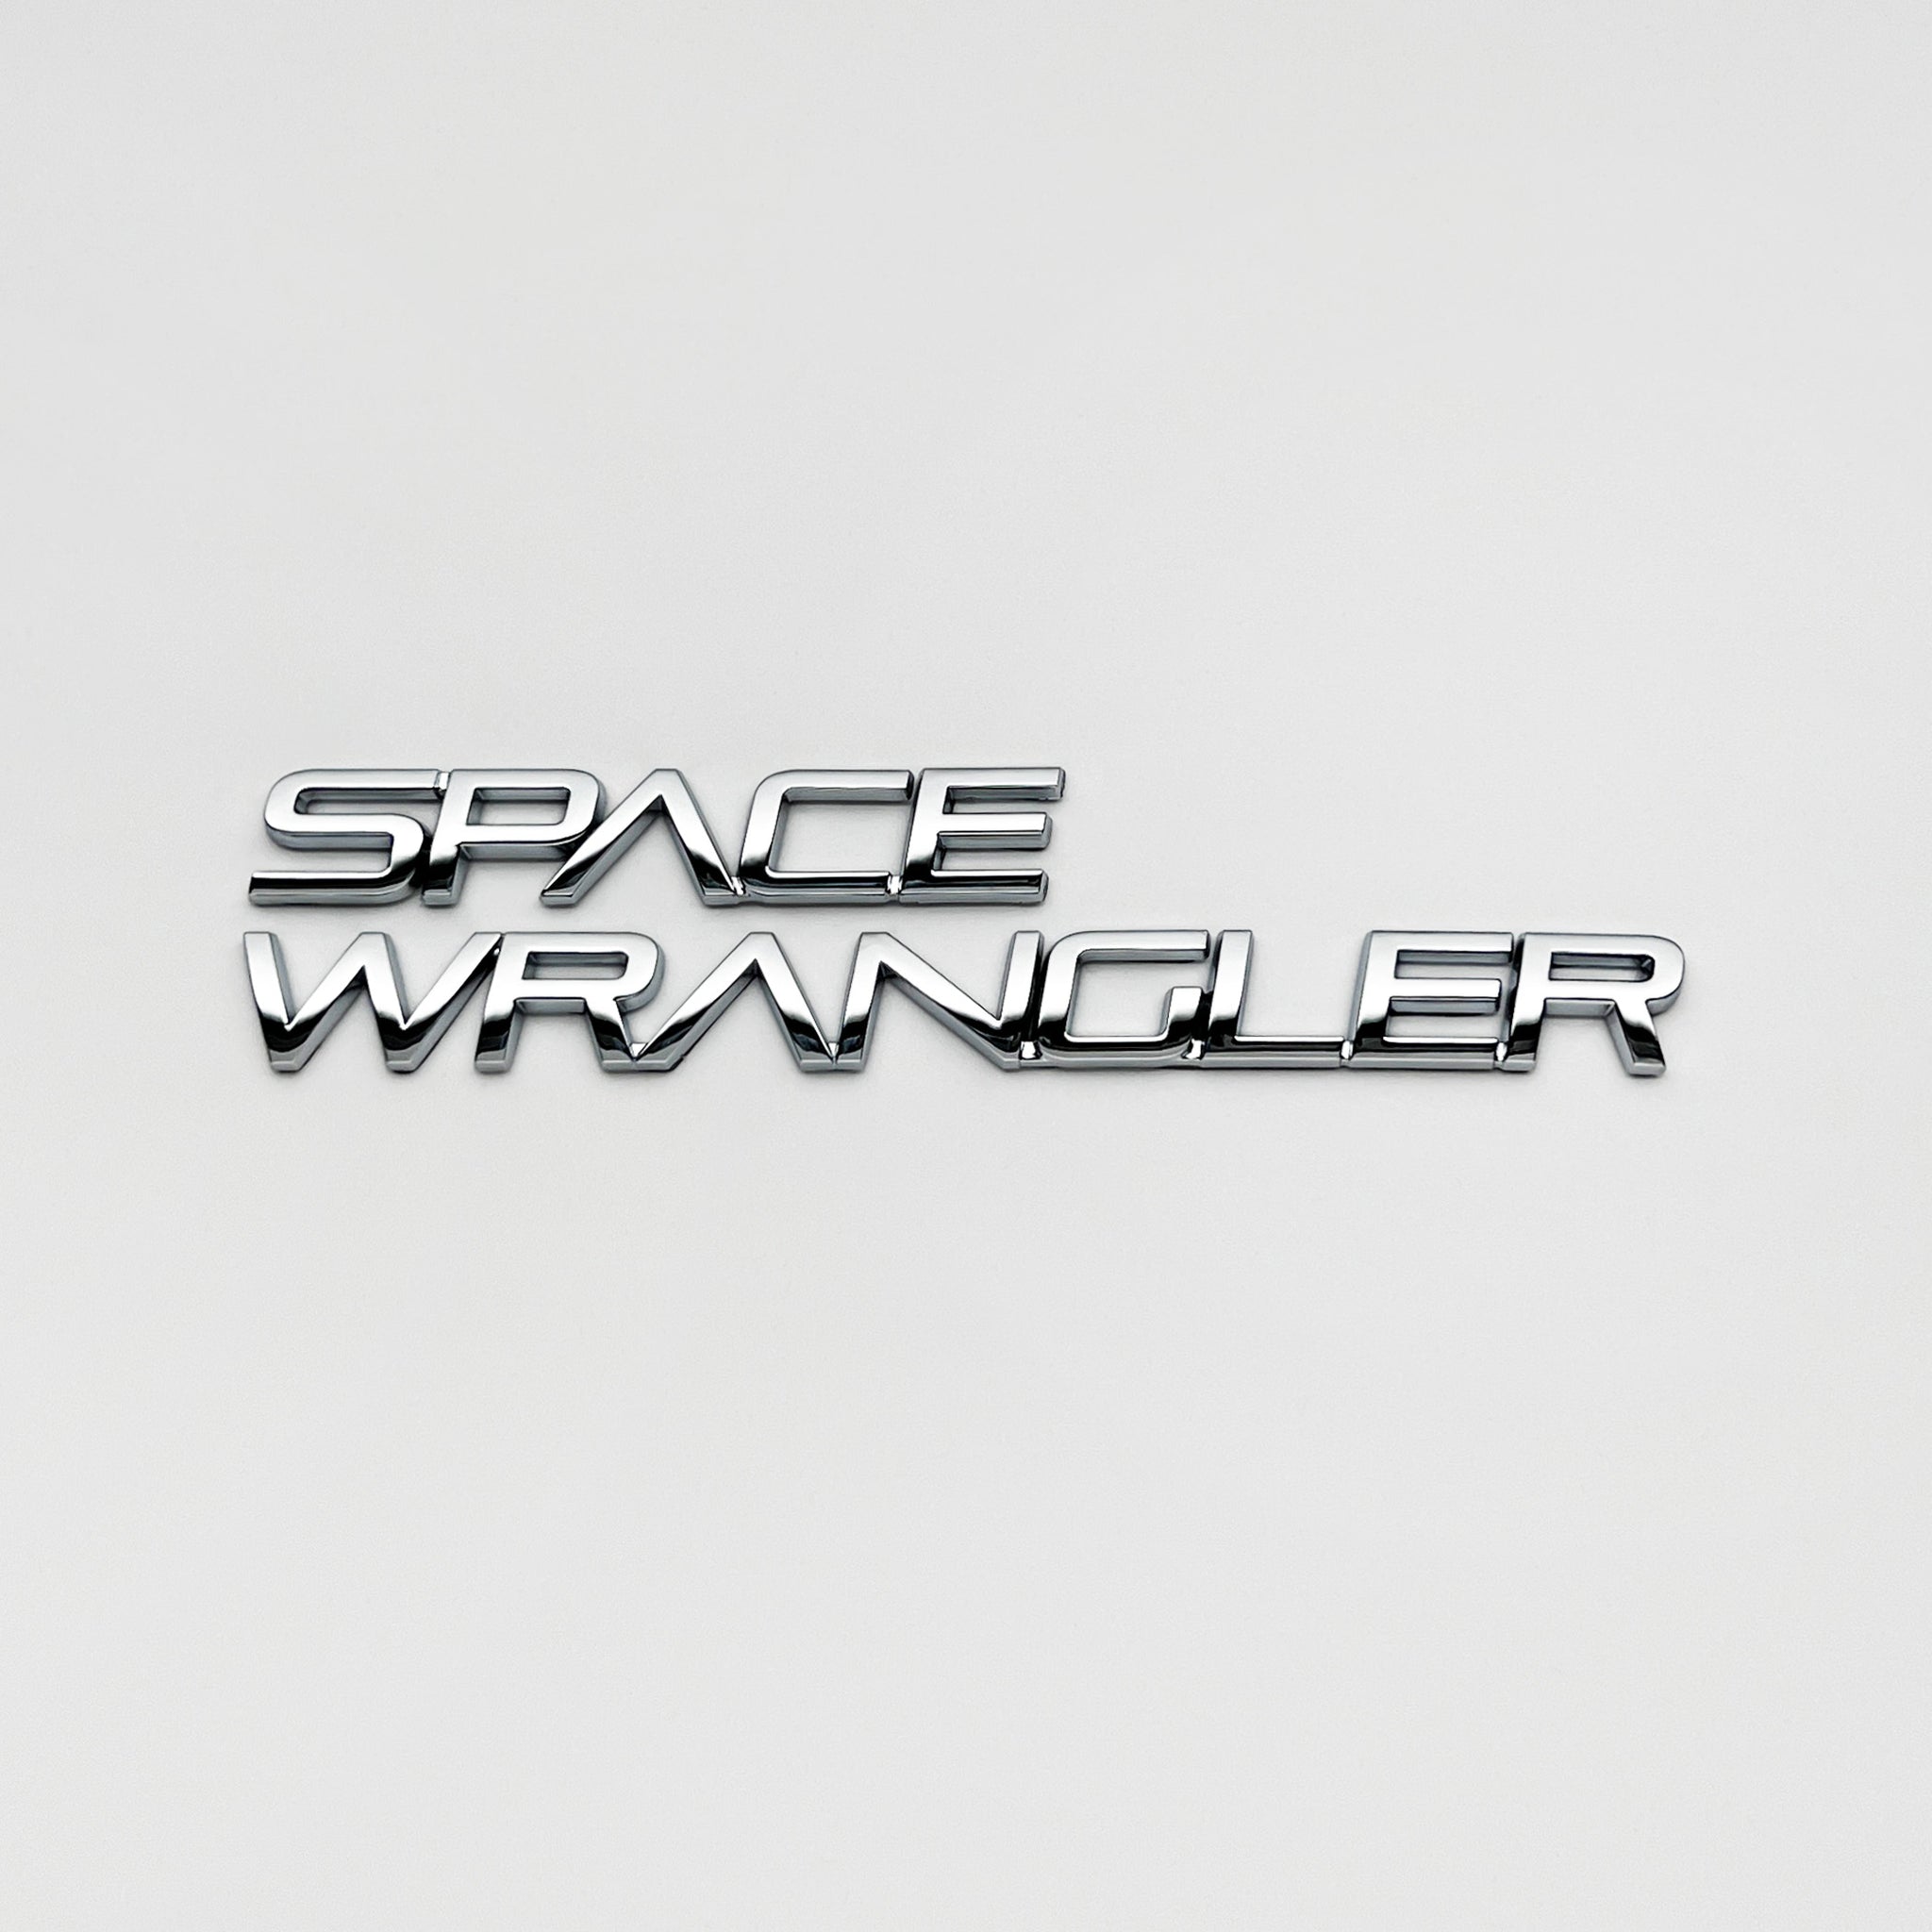 2012 Jeep Wrangler Arctic Edition: So Cool, But Only For Europe